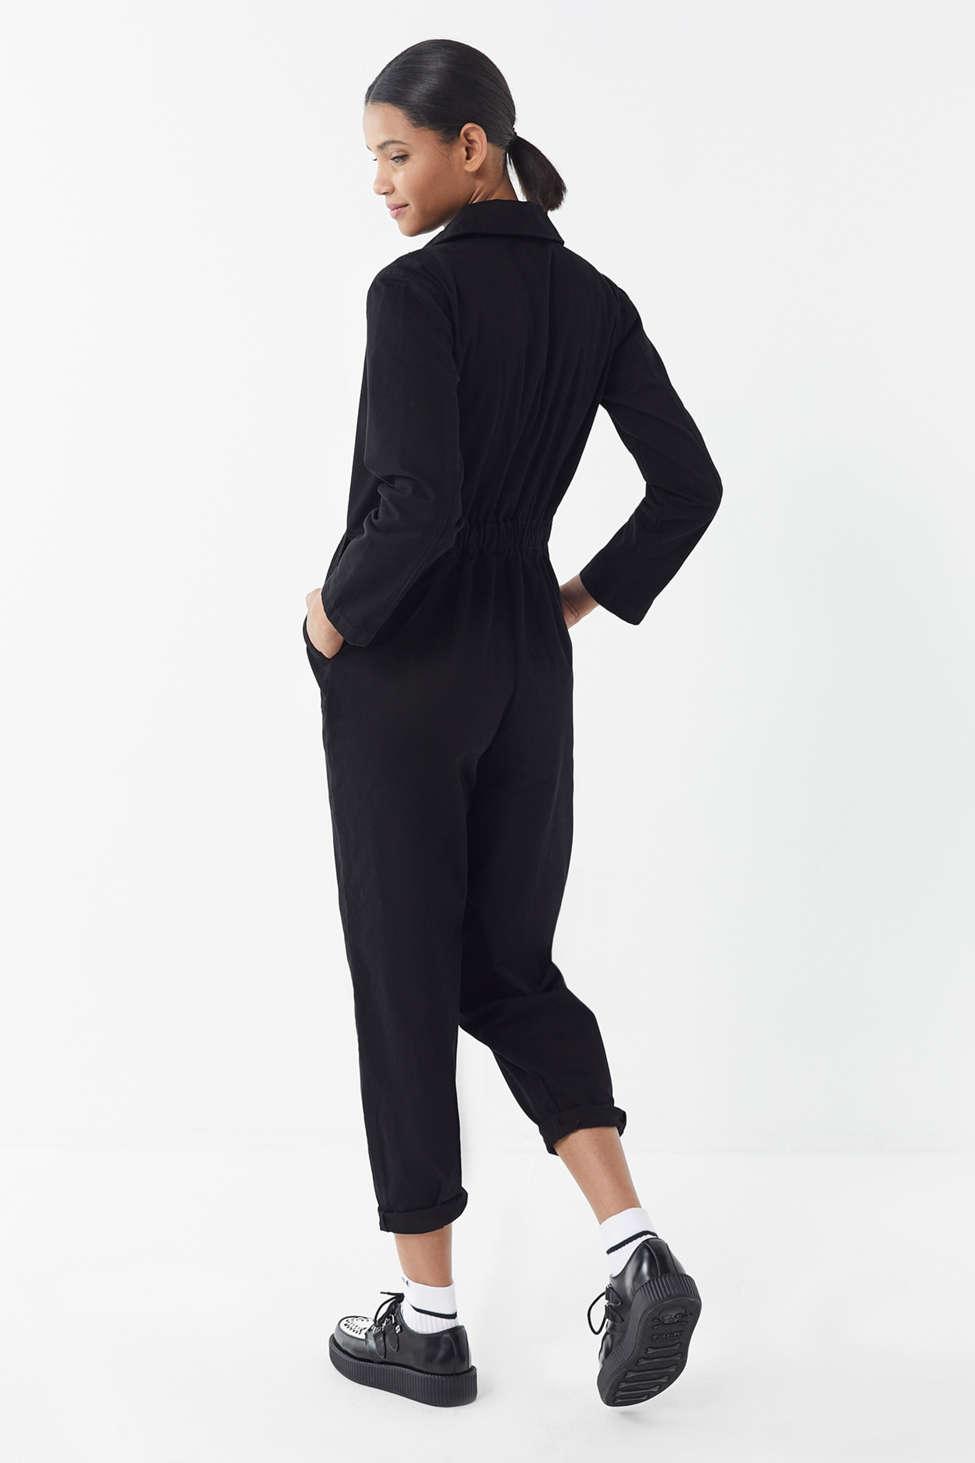 Urban Outfitters Uo Rosie Black Utility Jumpsuit | Lyst